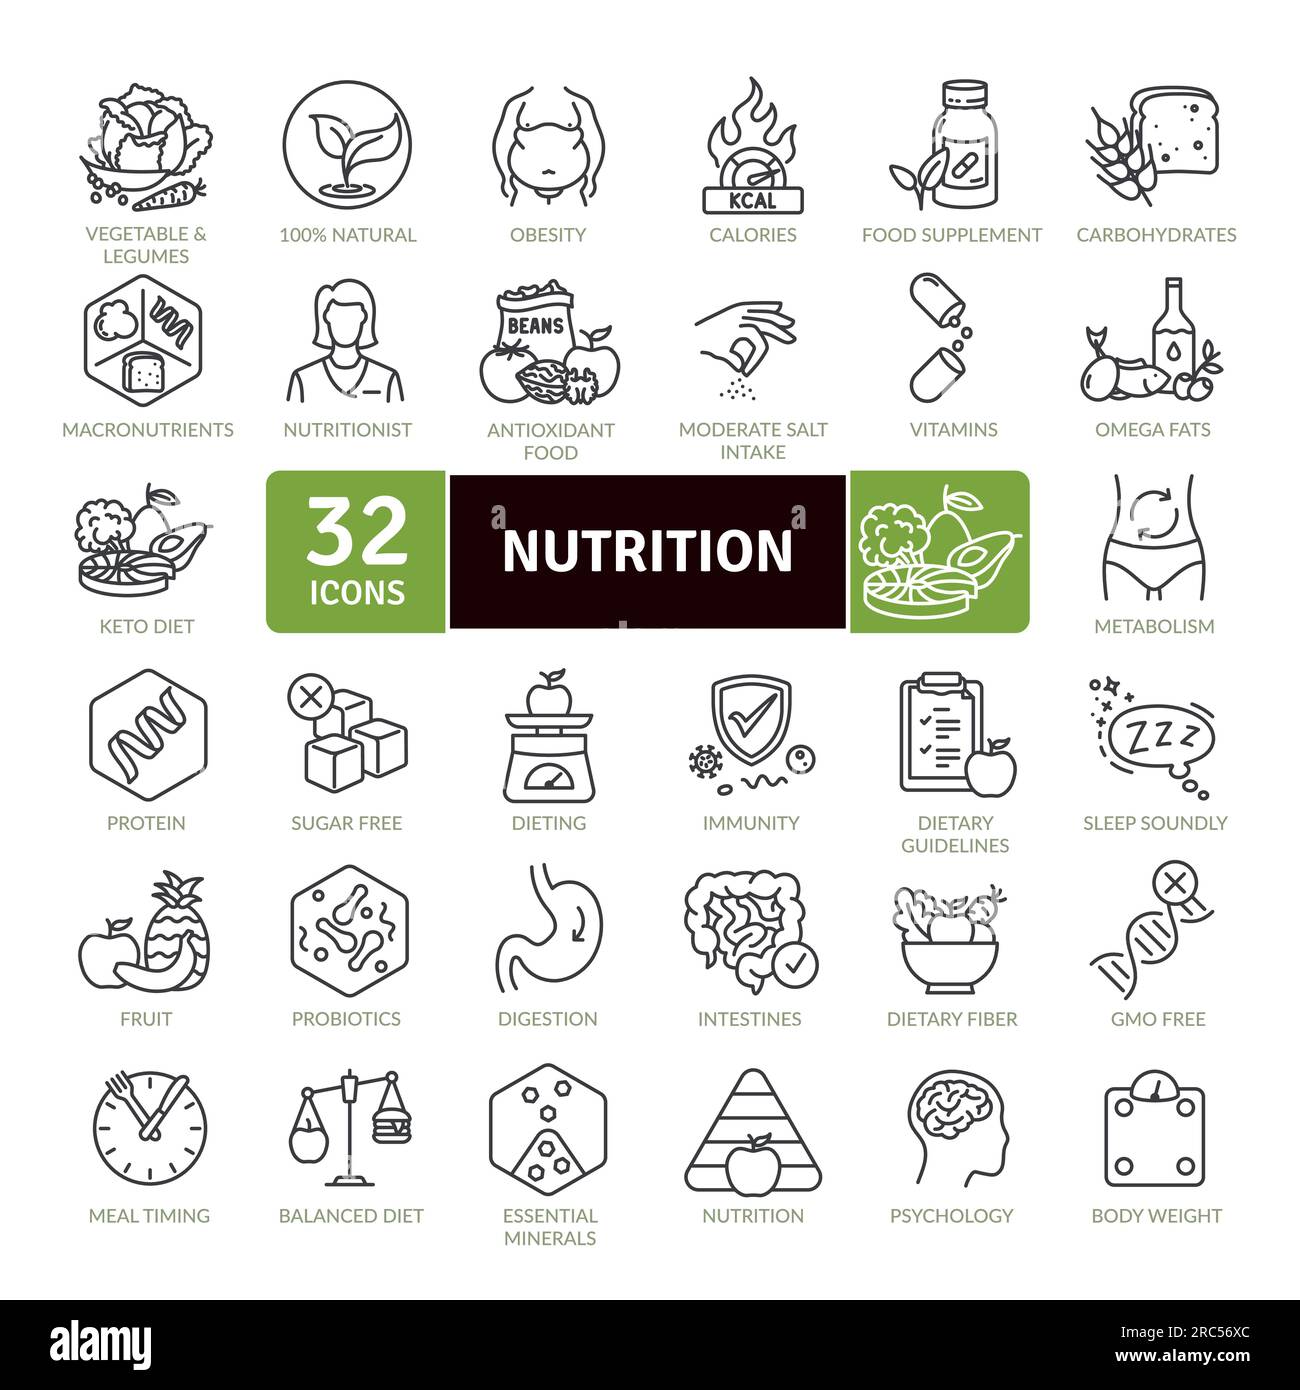 Nutrition and healthy eating icon pack. Collection of thin line icons that support digital navigation Stock Vector